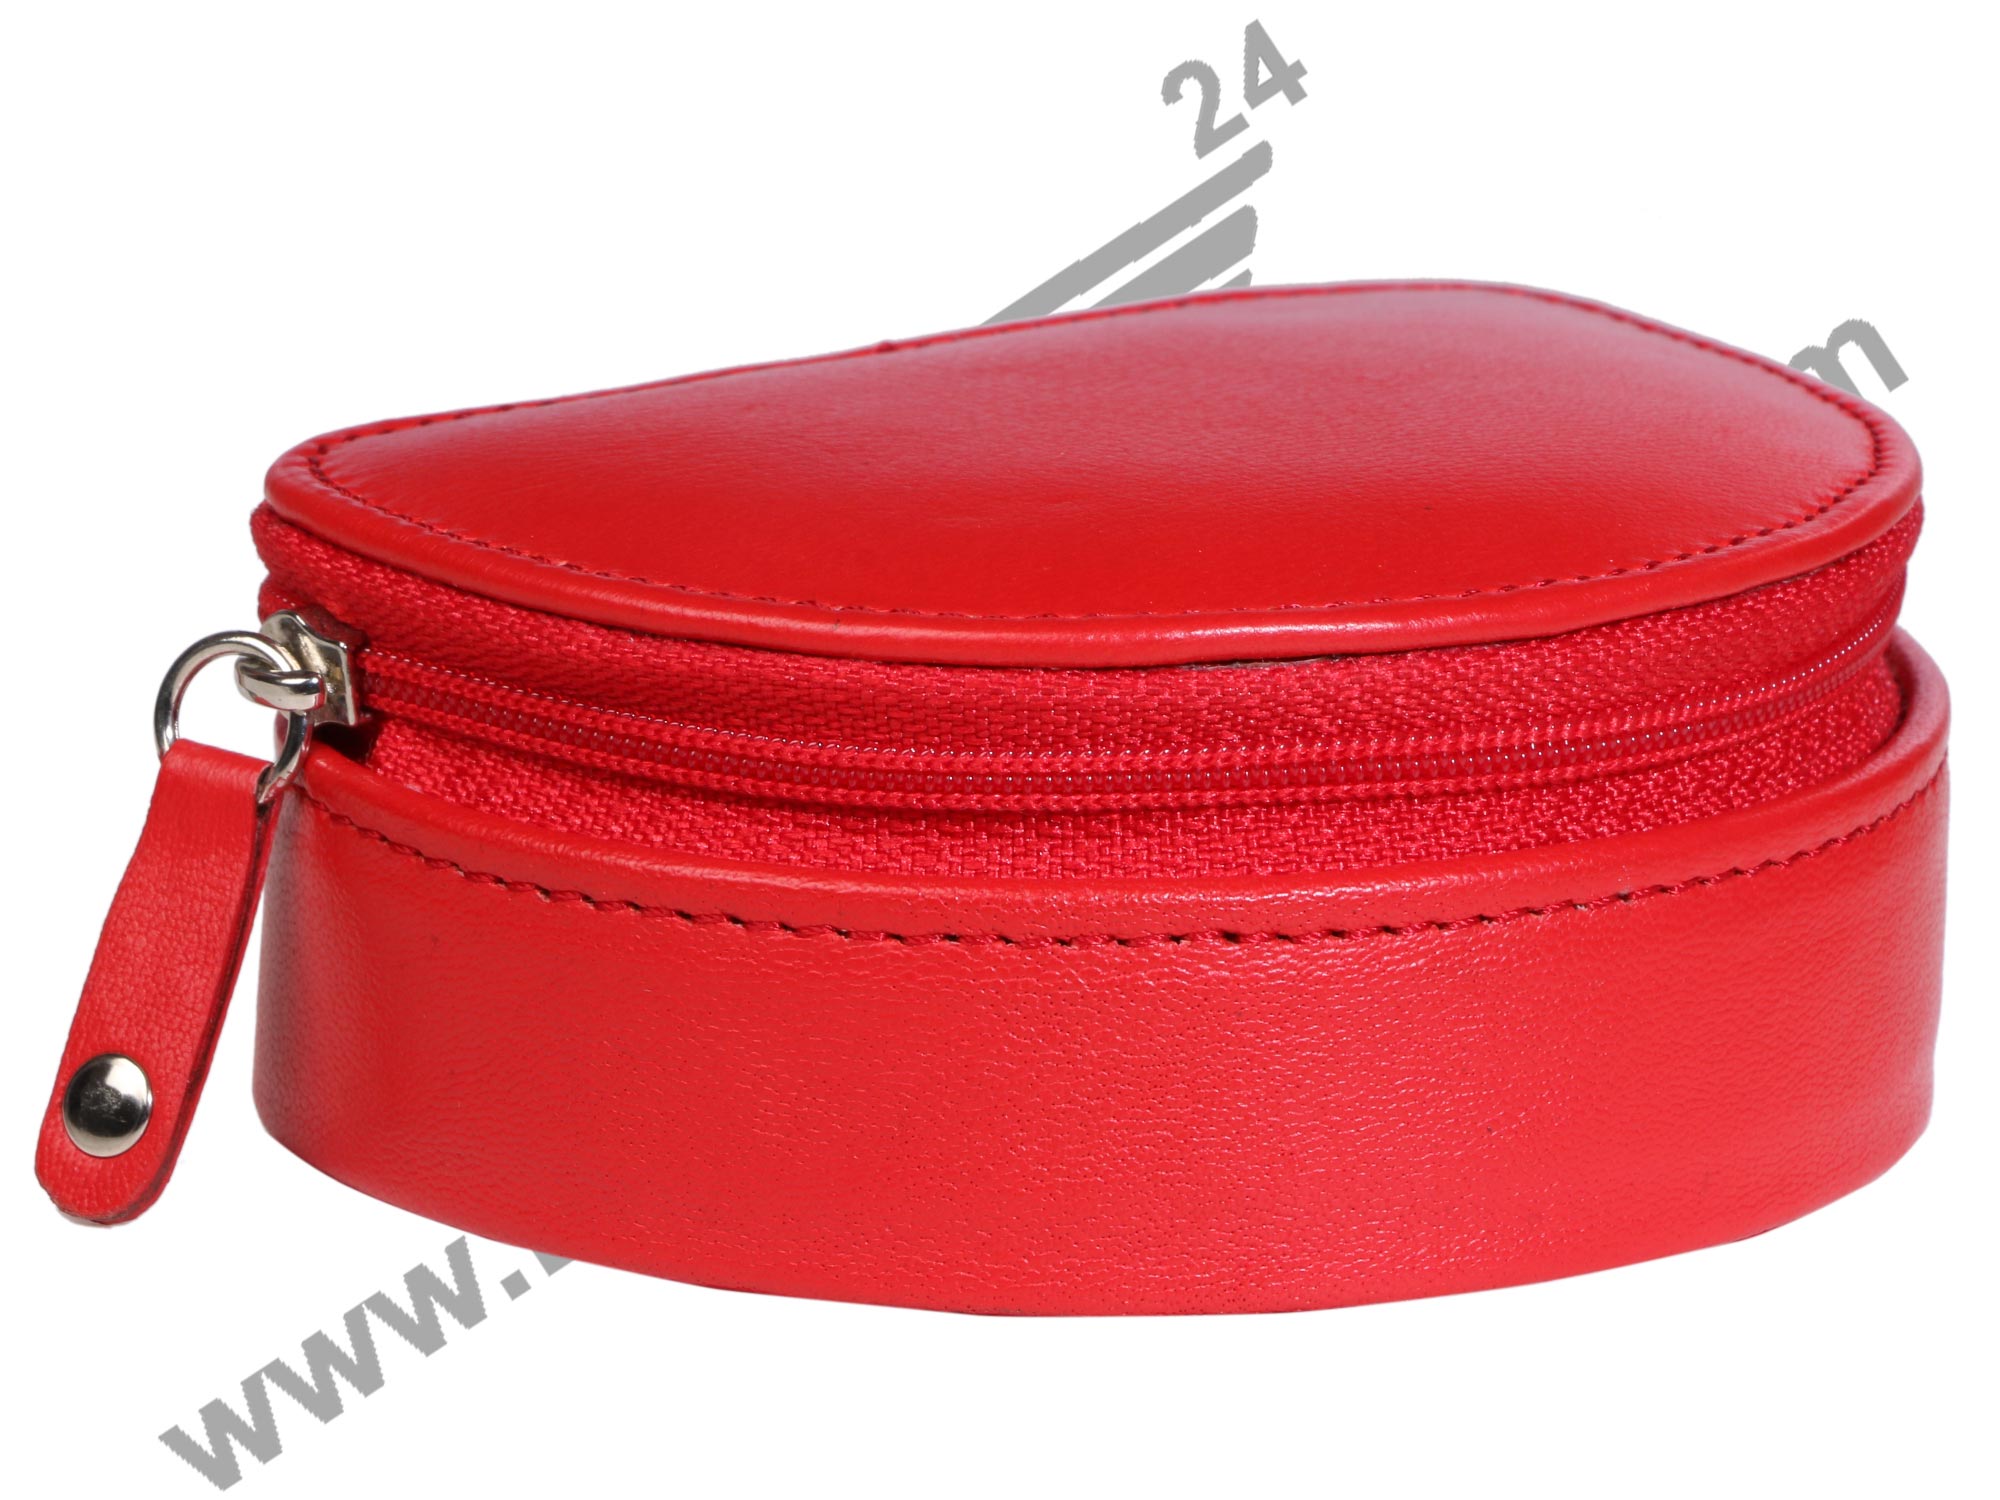 Side view of Red color TRAVEL SMALL JEWELERY CASE. It is stylish, sturdy in nature.